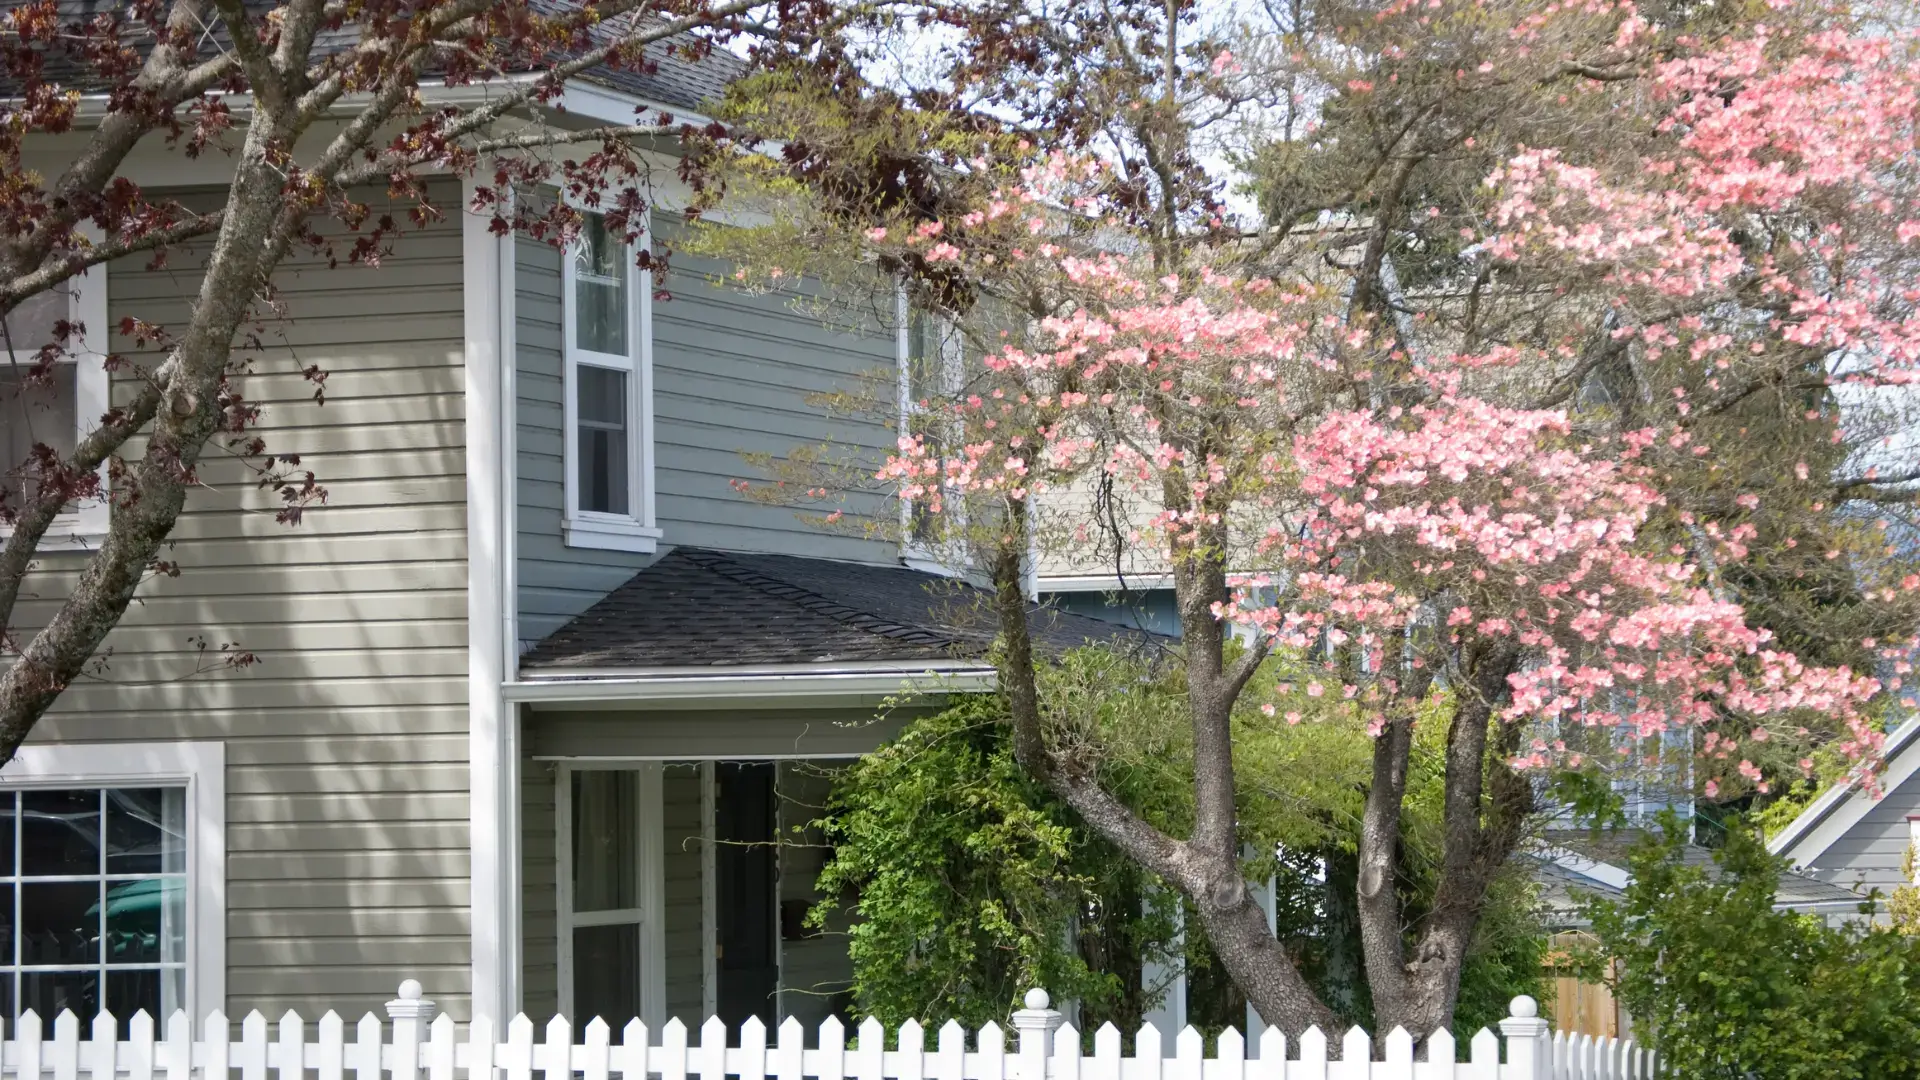 Two-story house with beige siding and spring blossoms against a white picket fence.